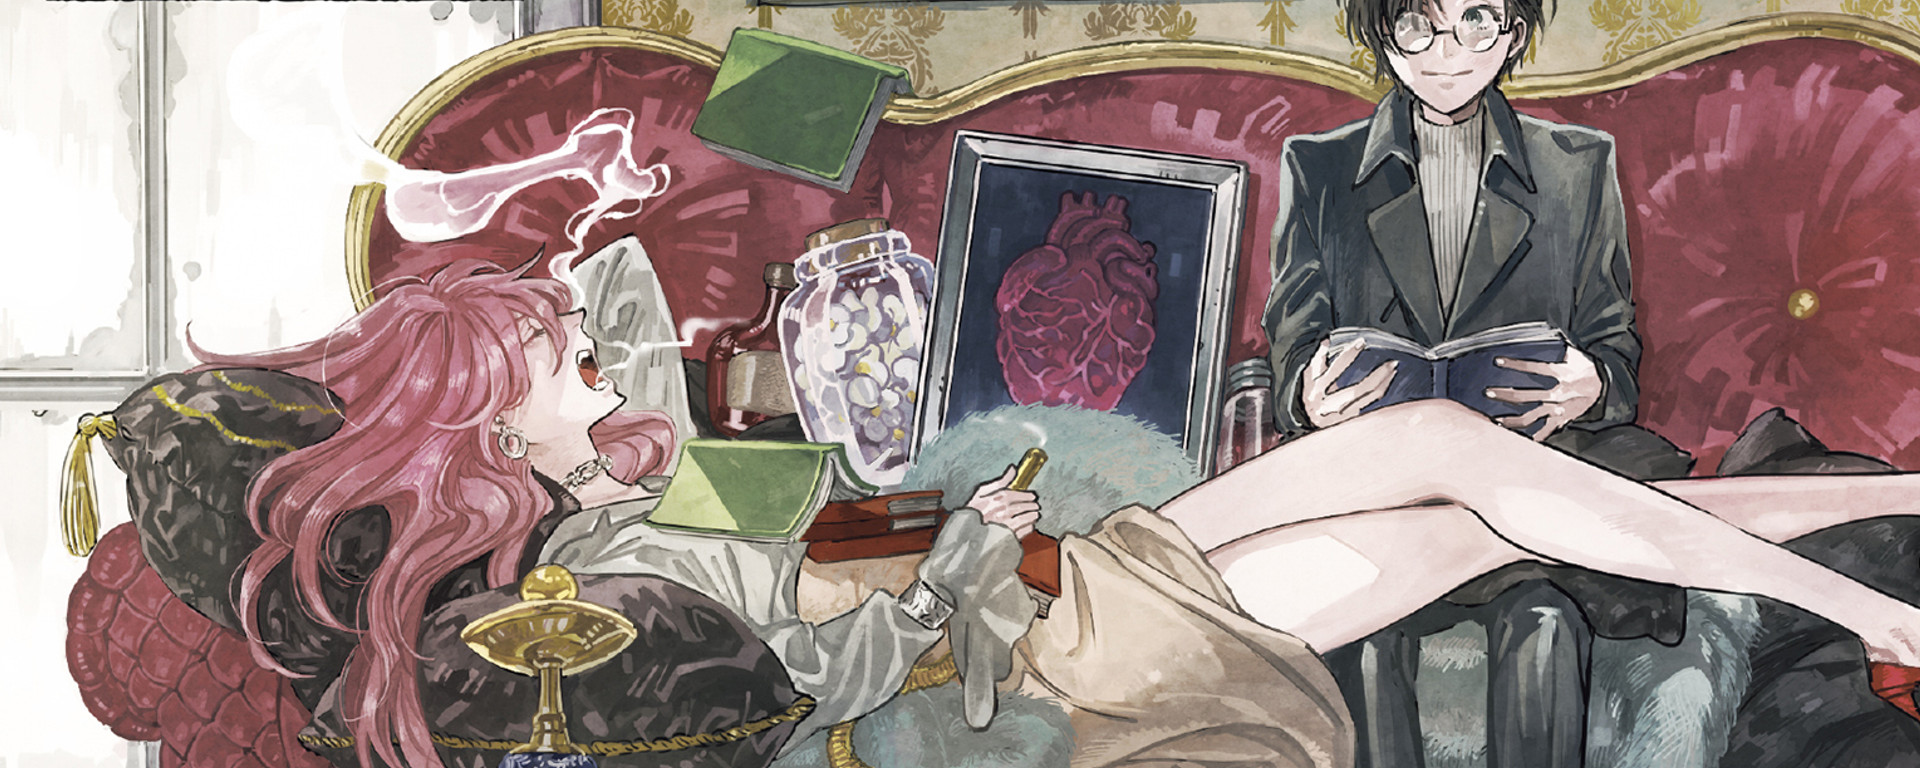 Witch of Thistle Castle Vol. 1 Header